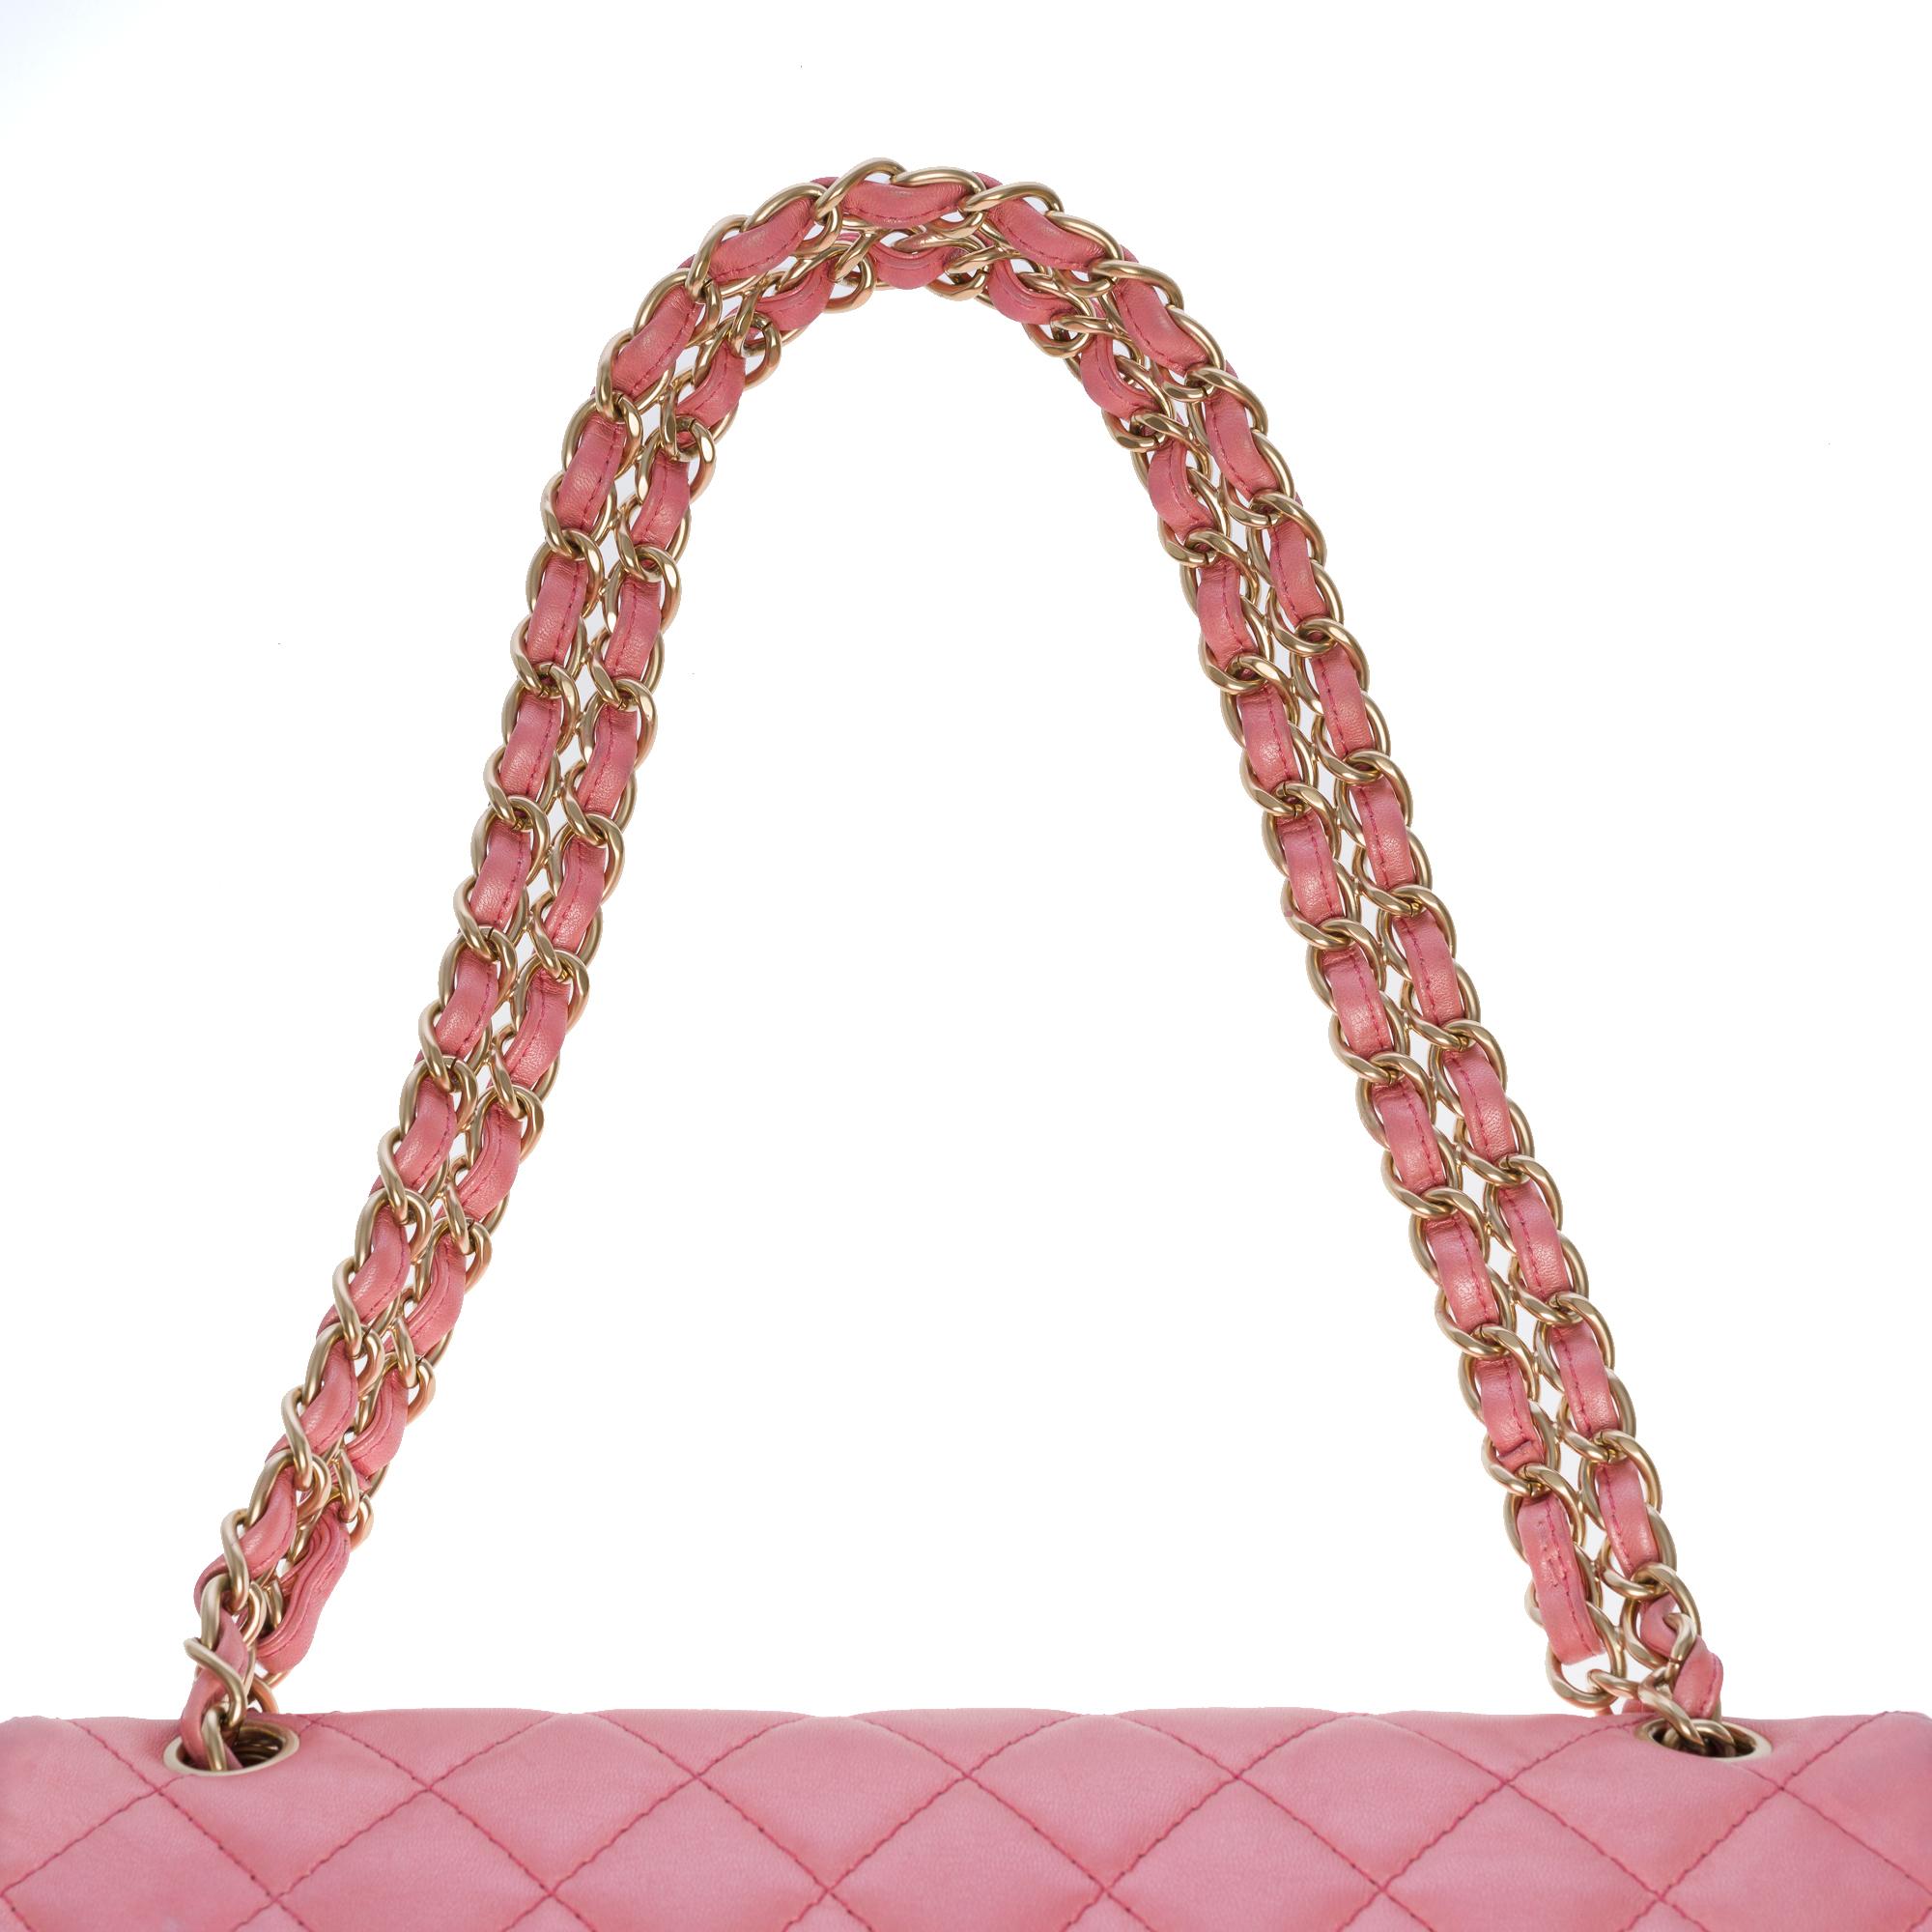 Chanel limited edition shoulder flap bag in Metallic Pink quilted leather, MGHW For Sale 7